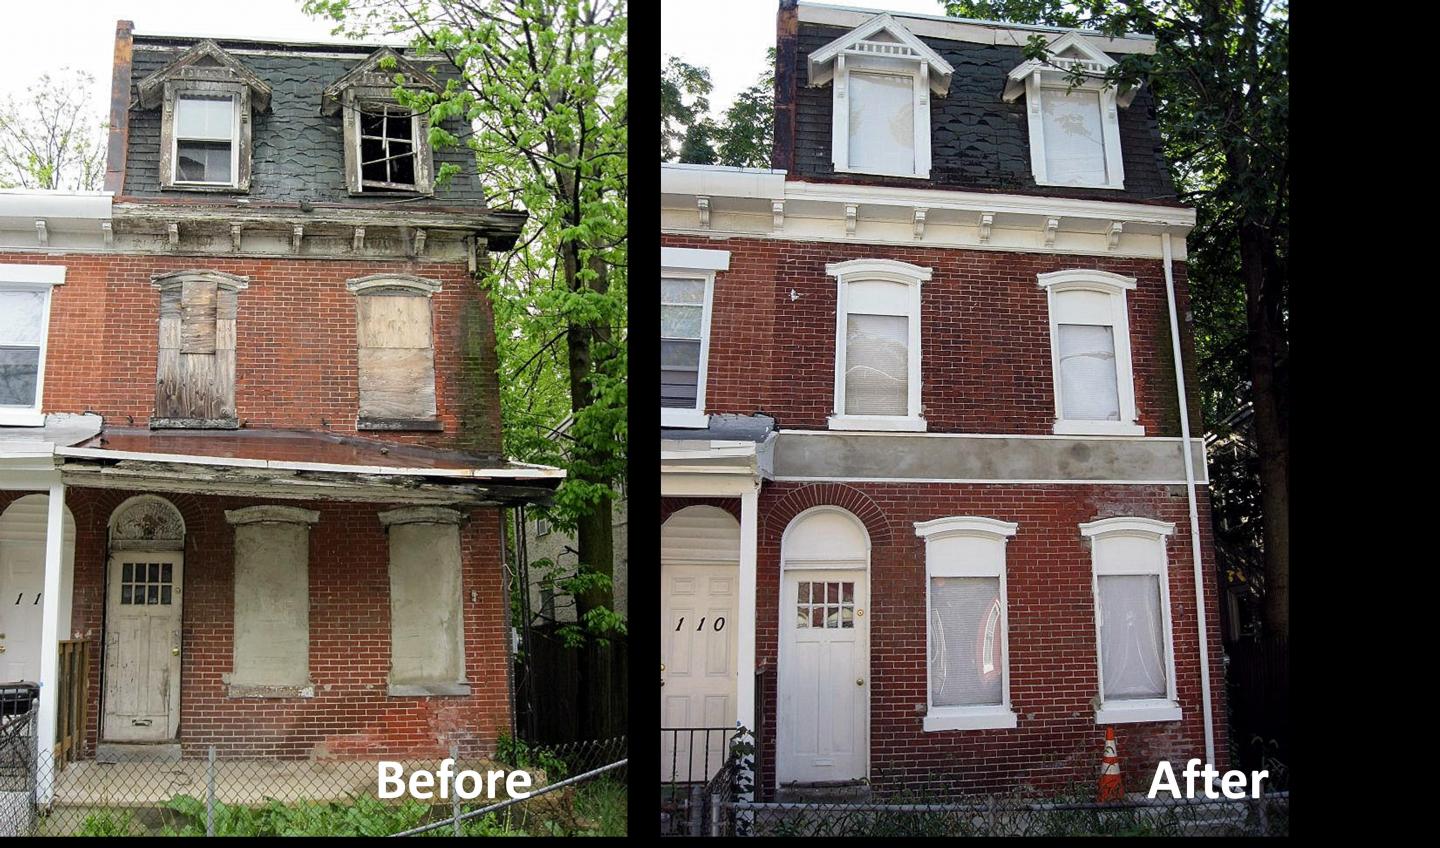 A Philadelphia Property Before and After Remediation